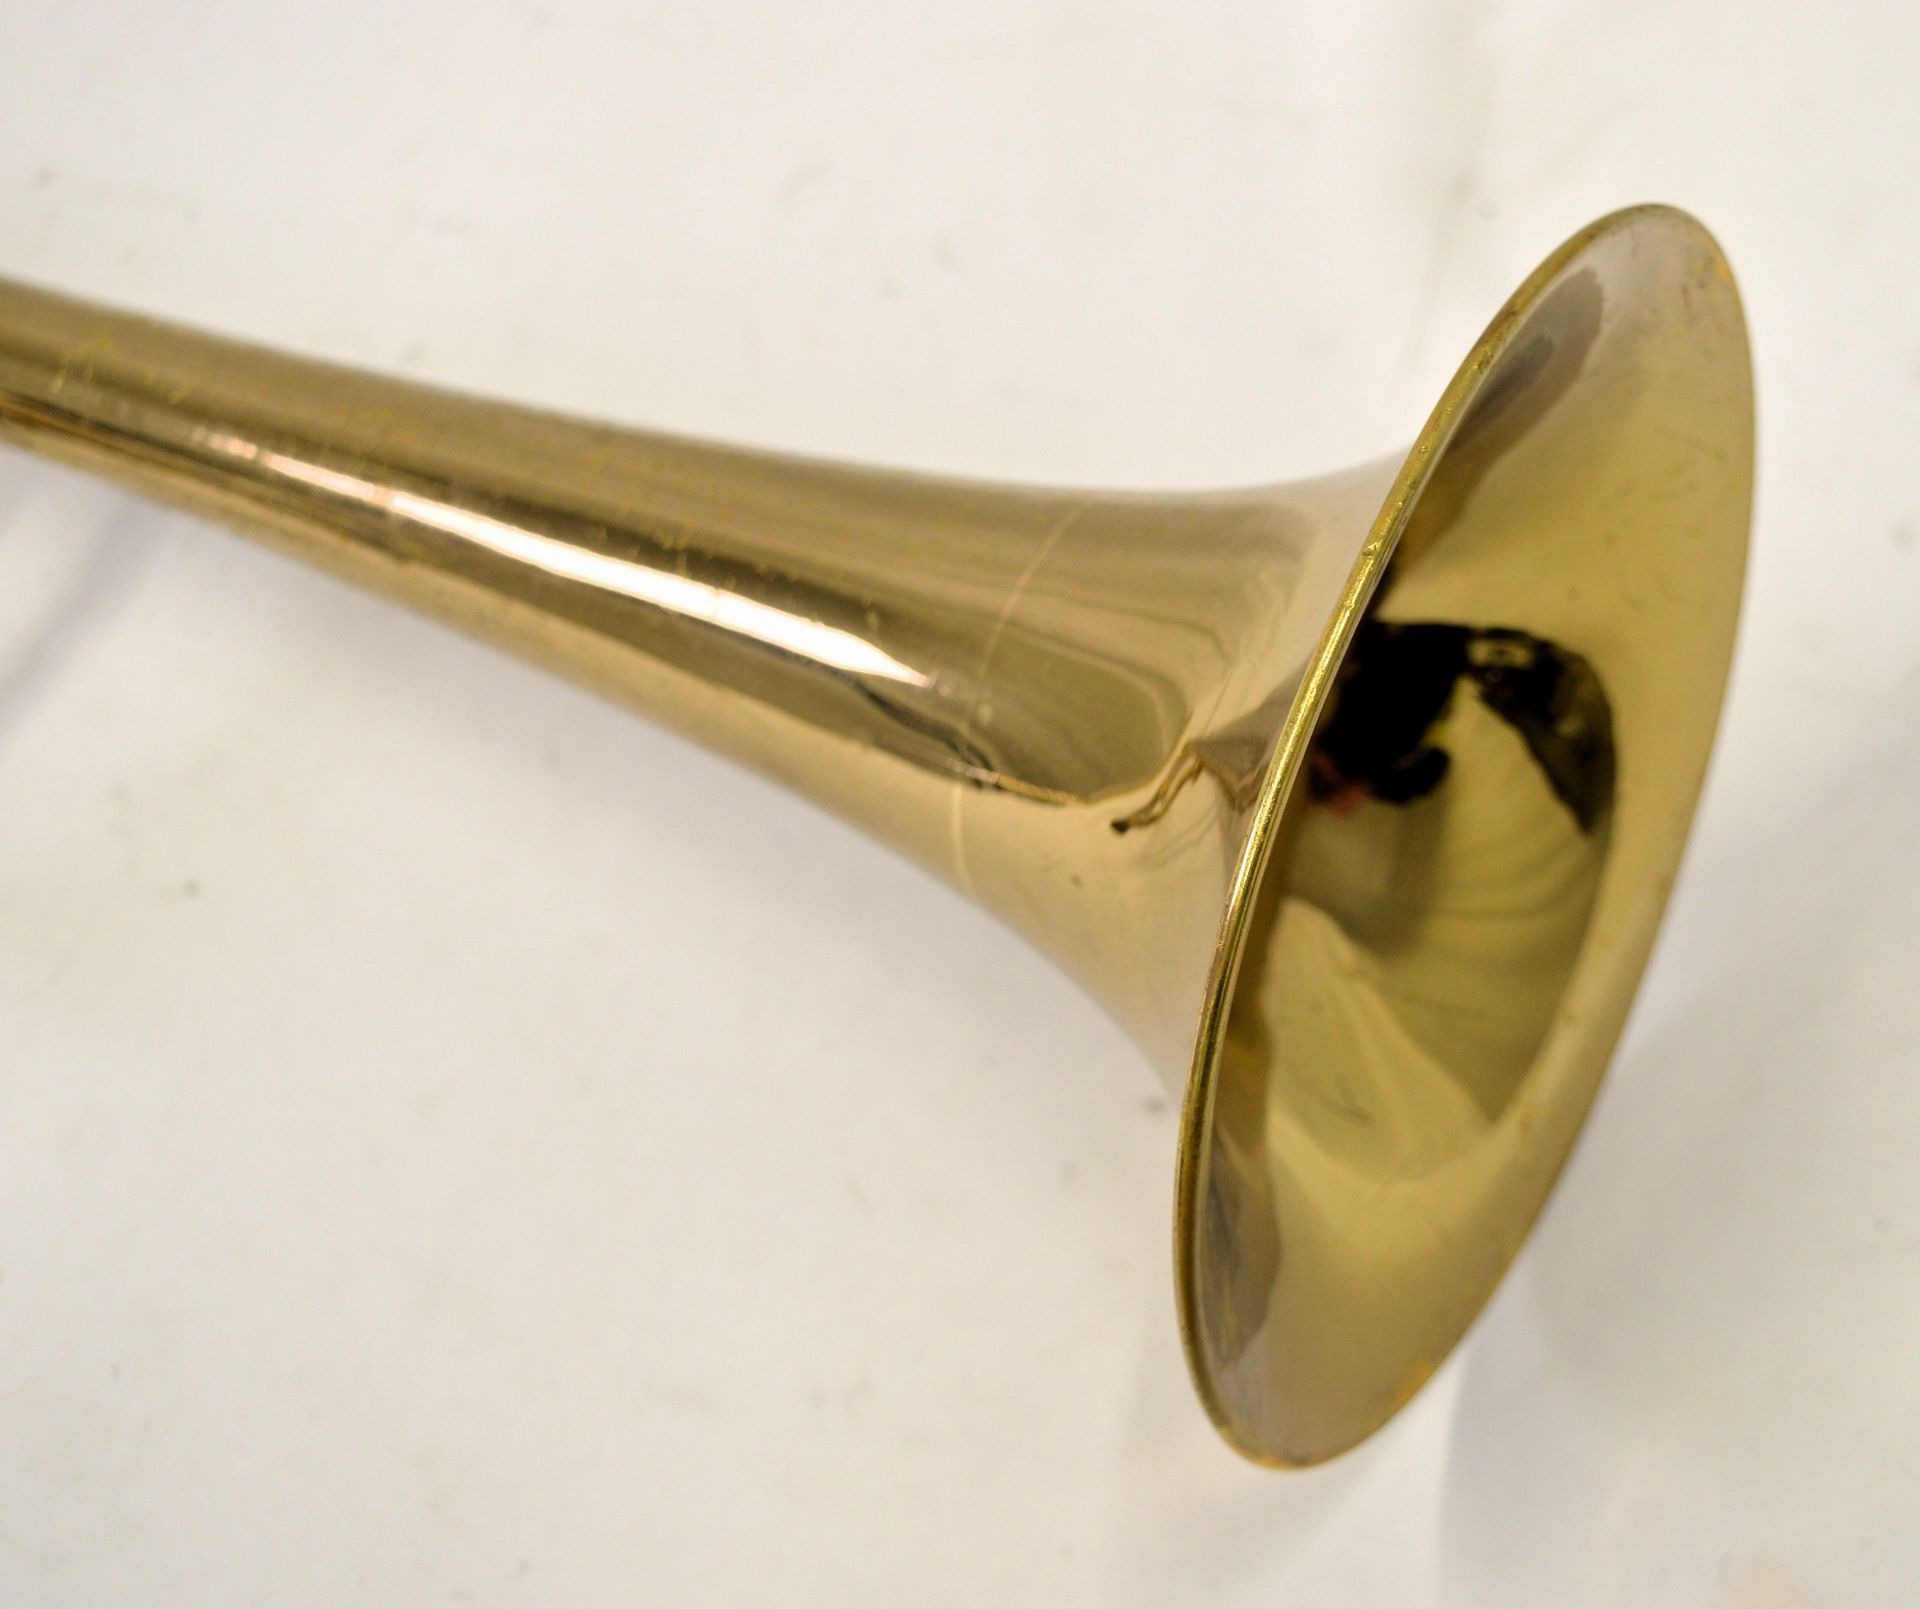 Bach Trombone with Case. Water key missing. Serial No. 89521. - Image 12 of 23